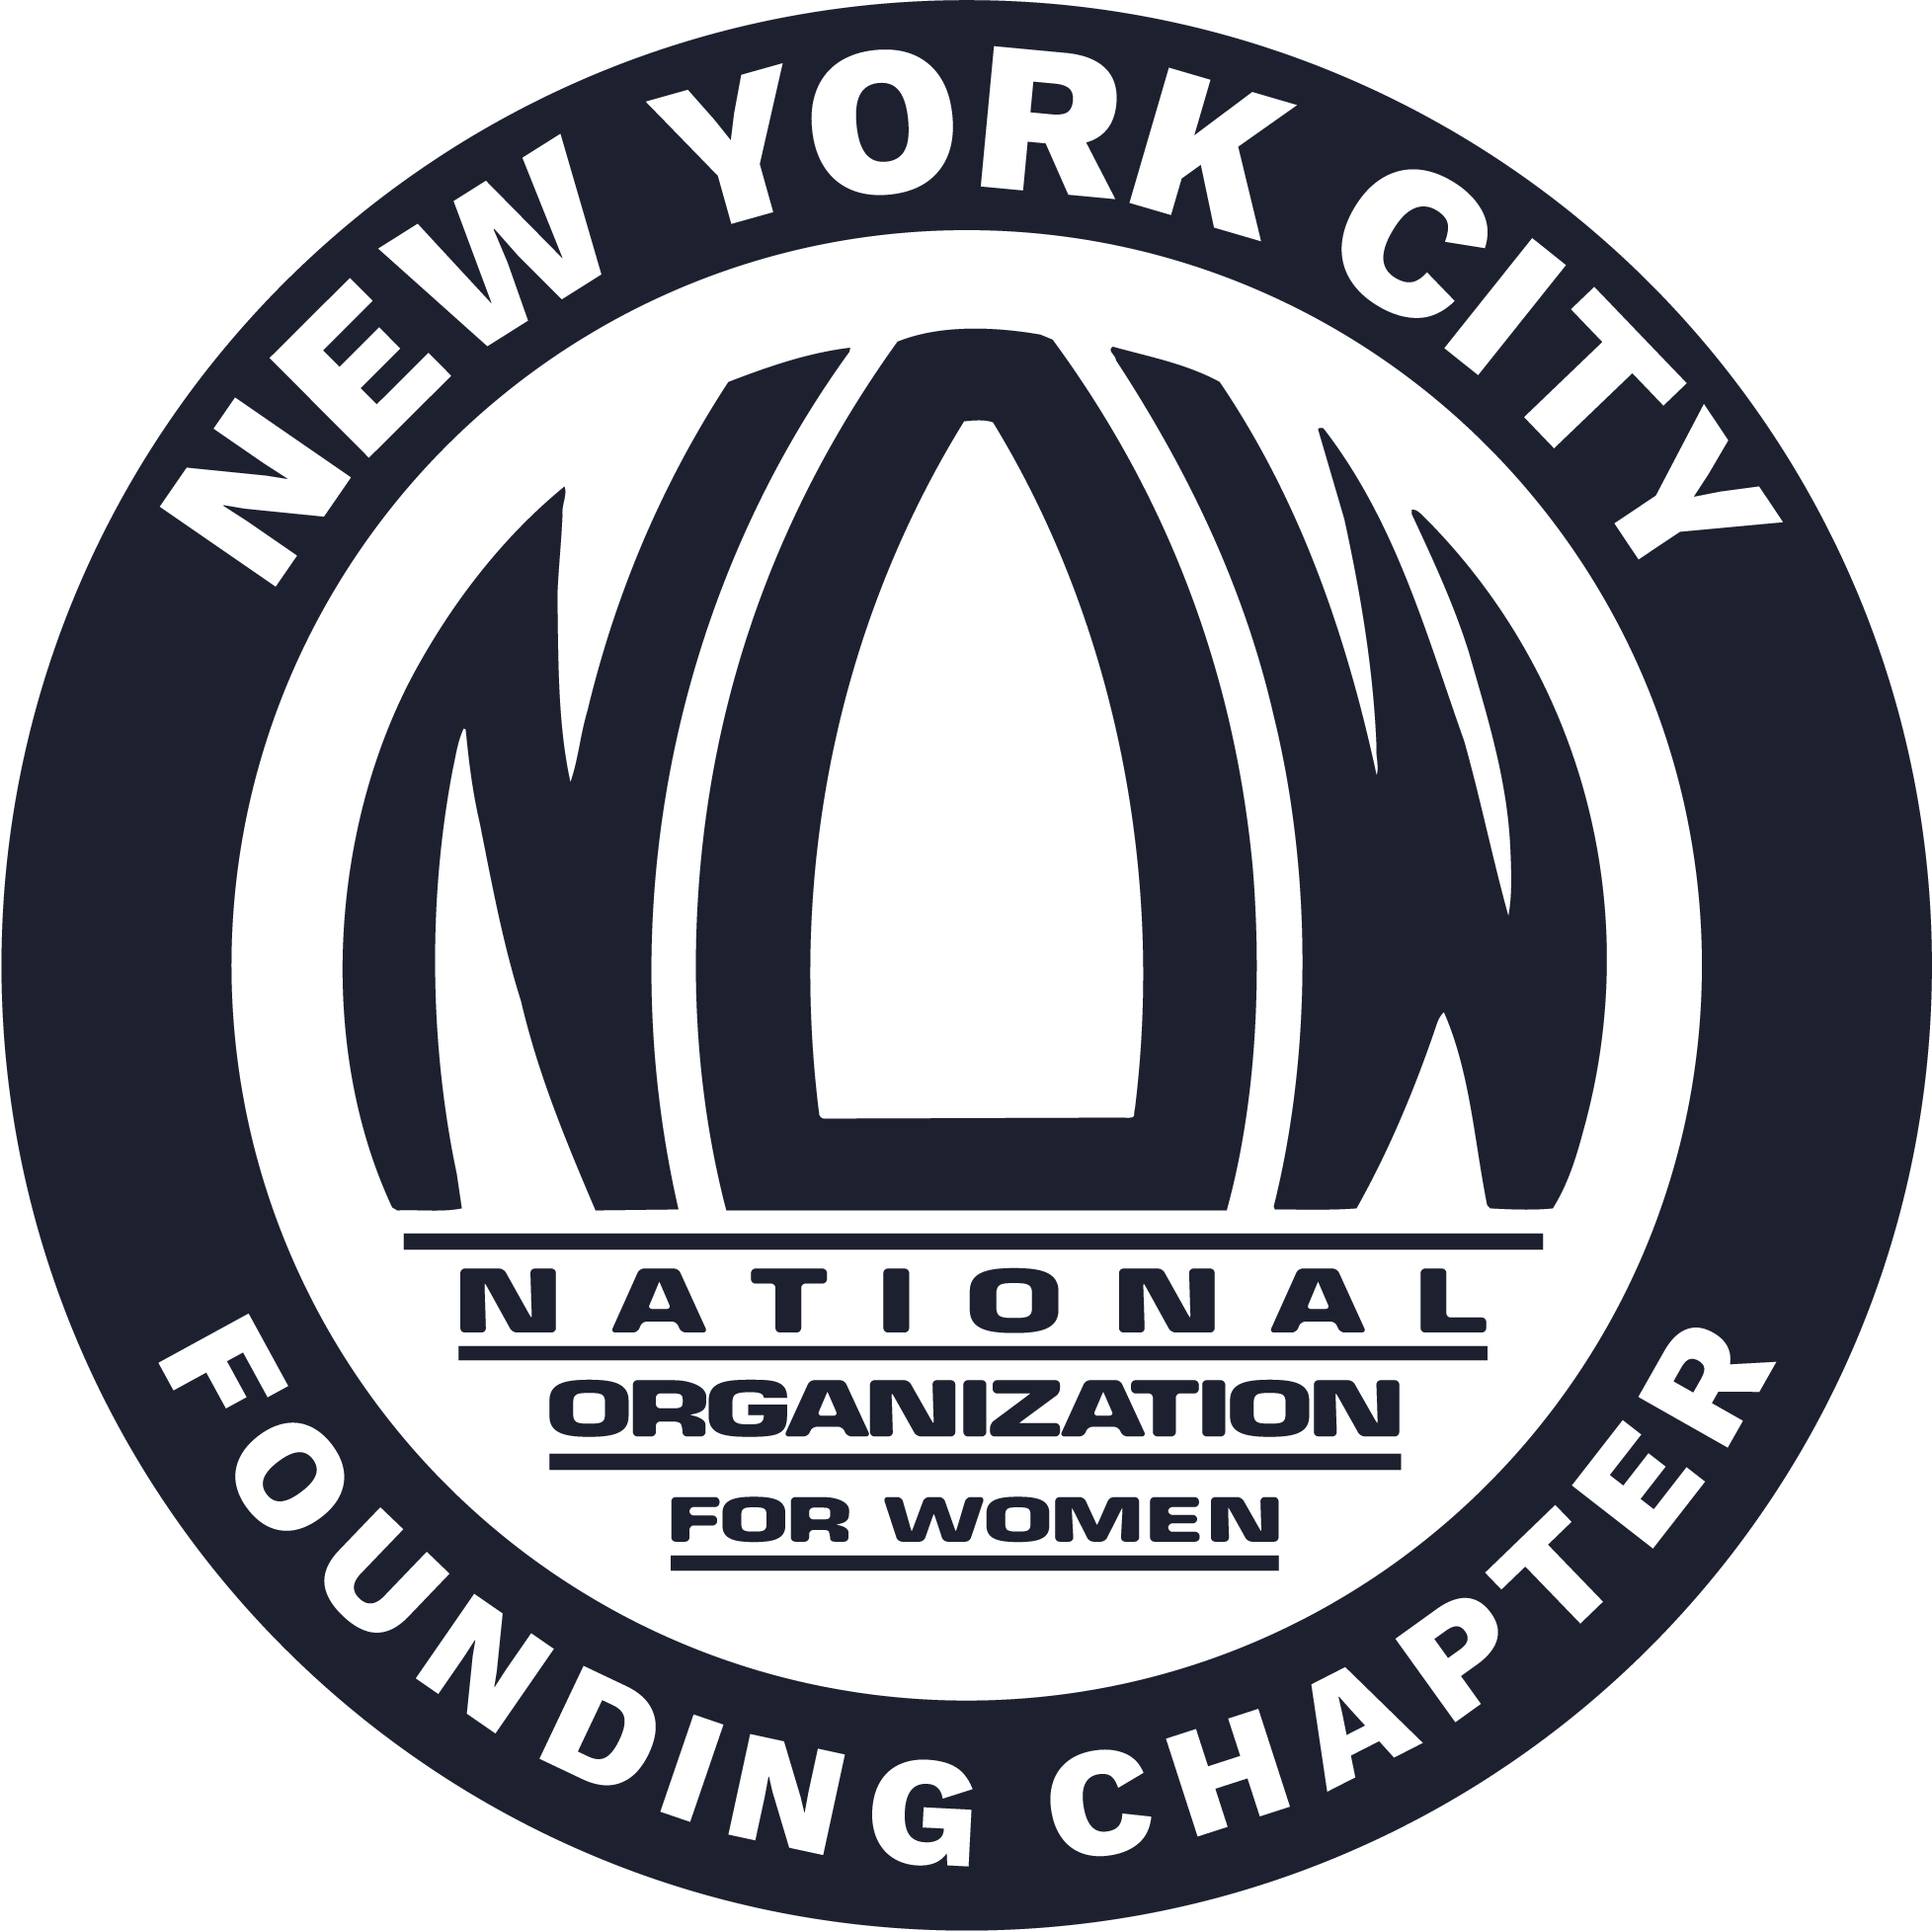 Female Political Organization in USA - National Organization for Women New York City Founding Chapter